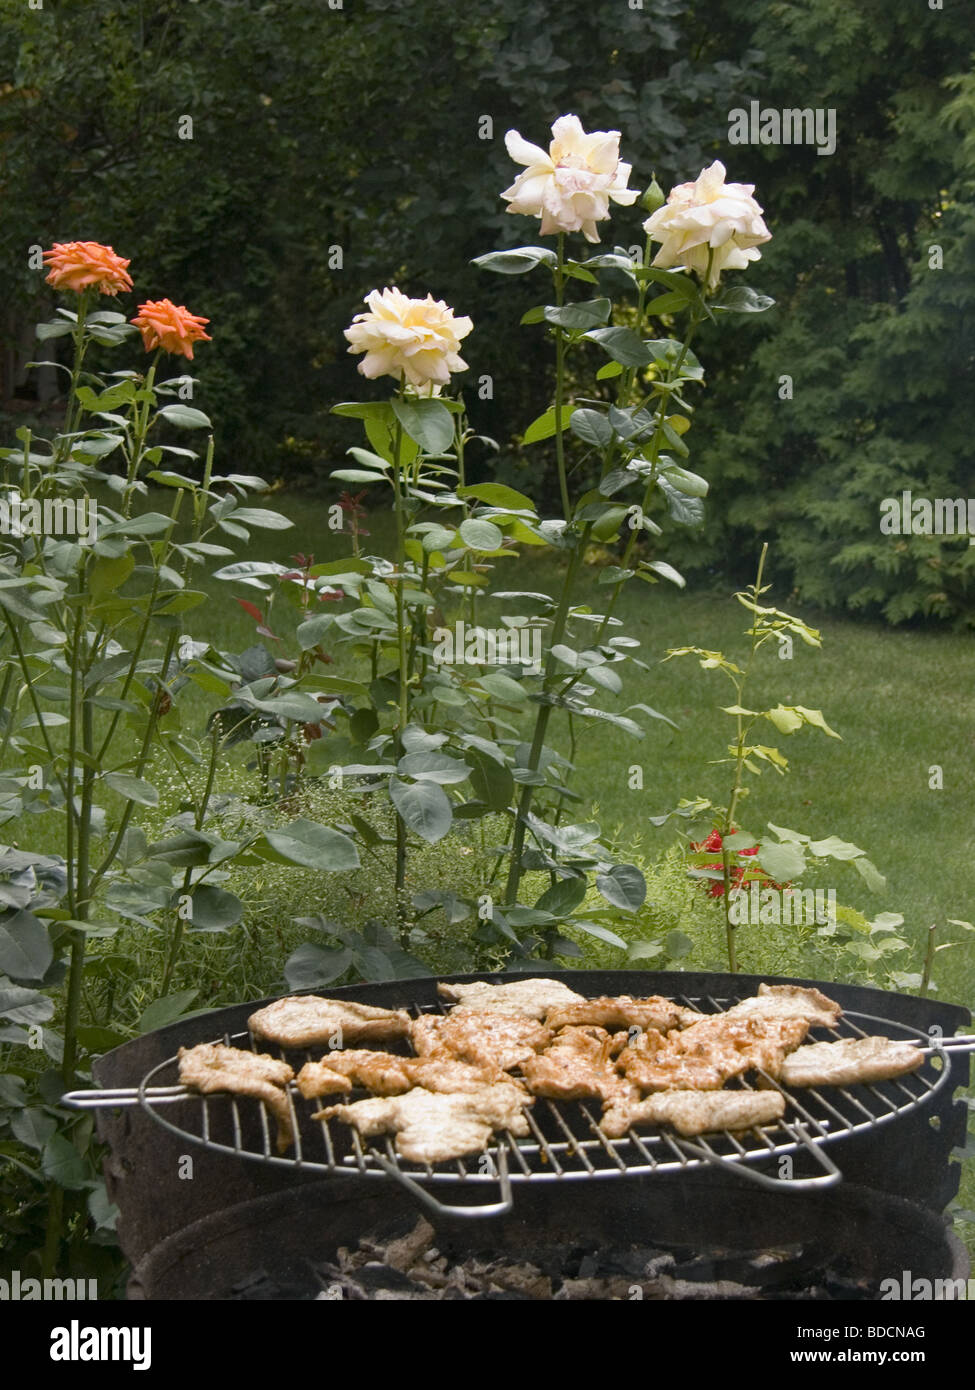 Grill Grilling Charcoal Briquette Heat Fire Stock Photo